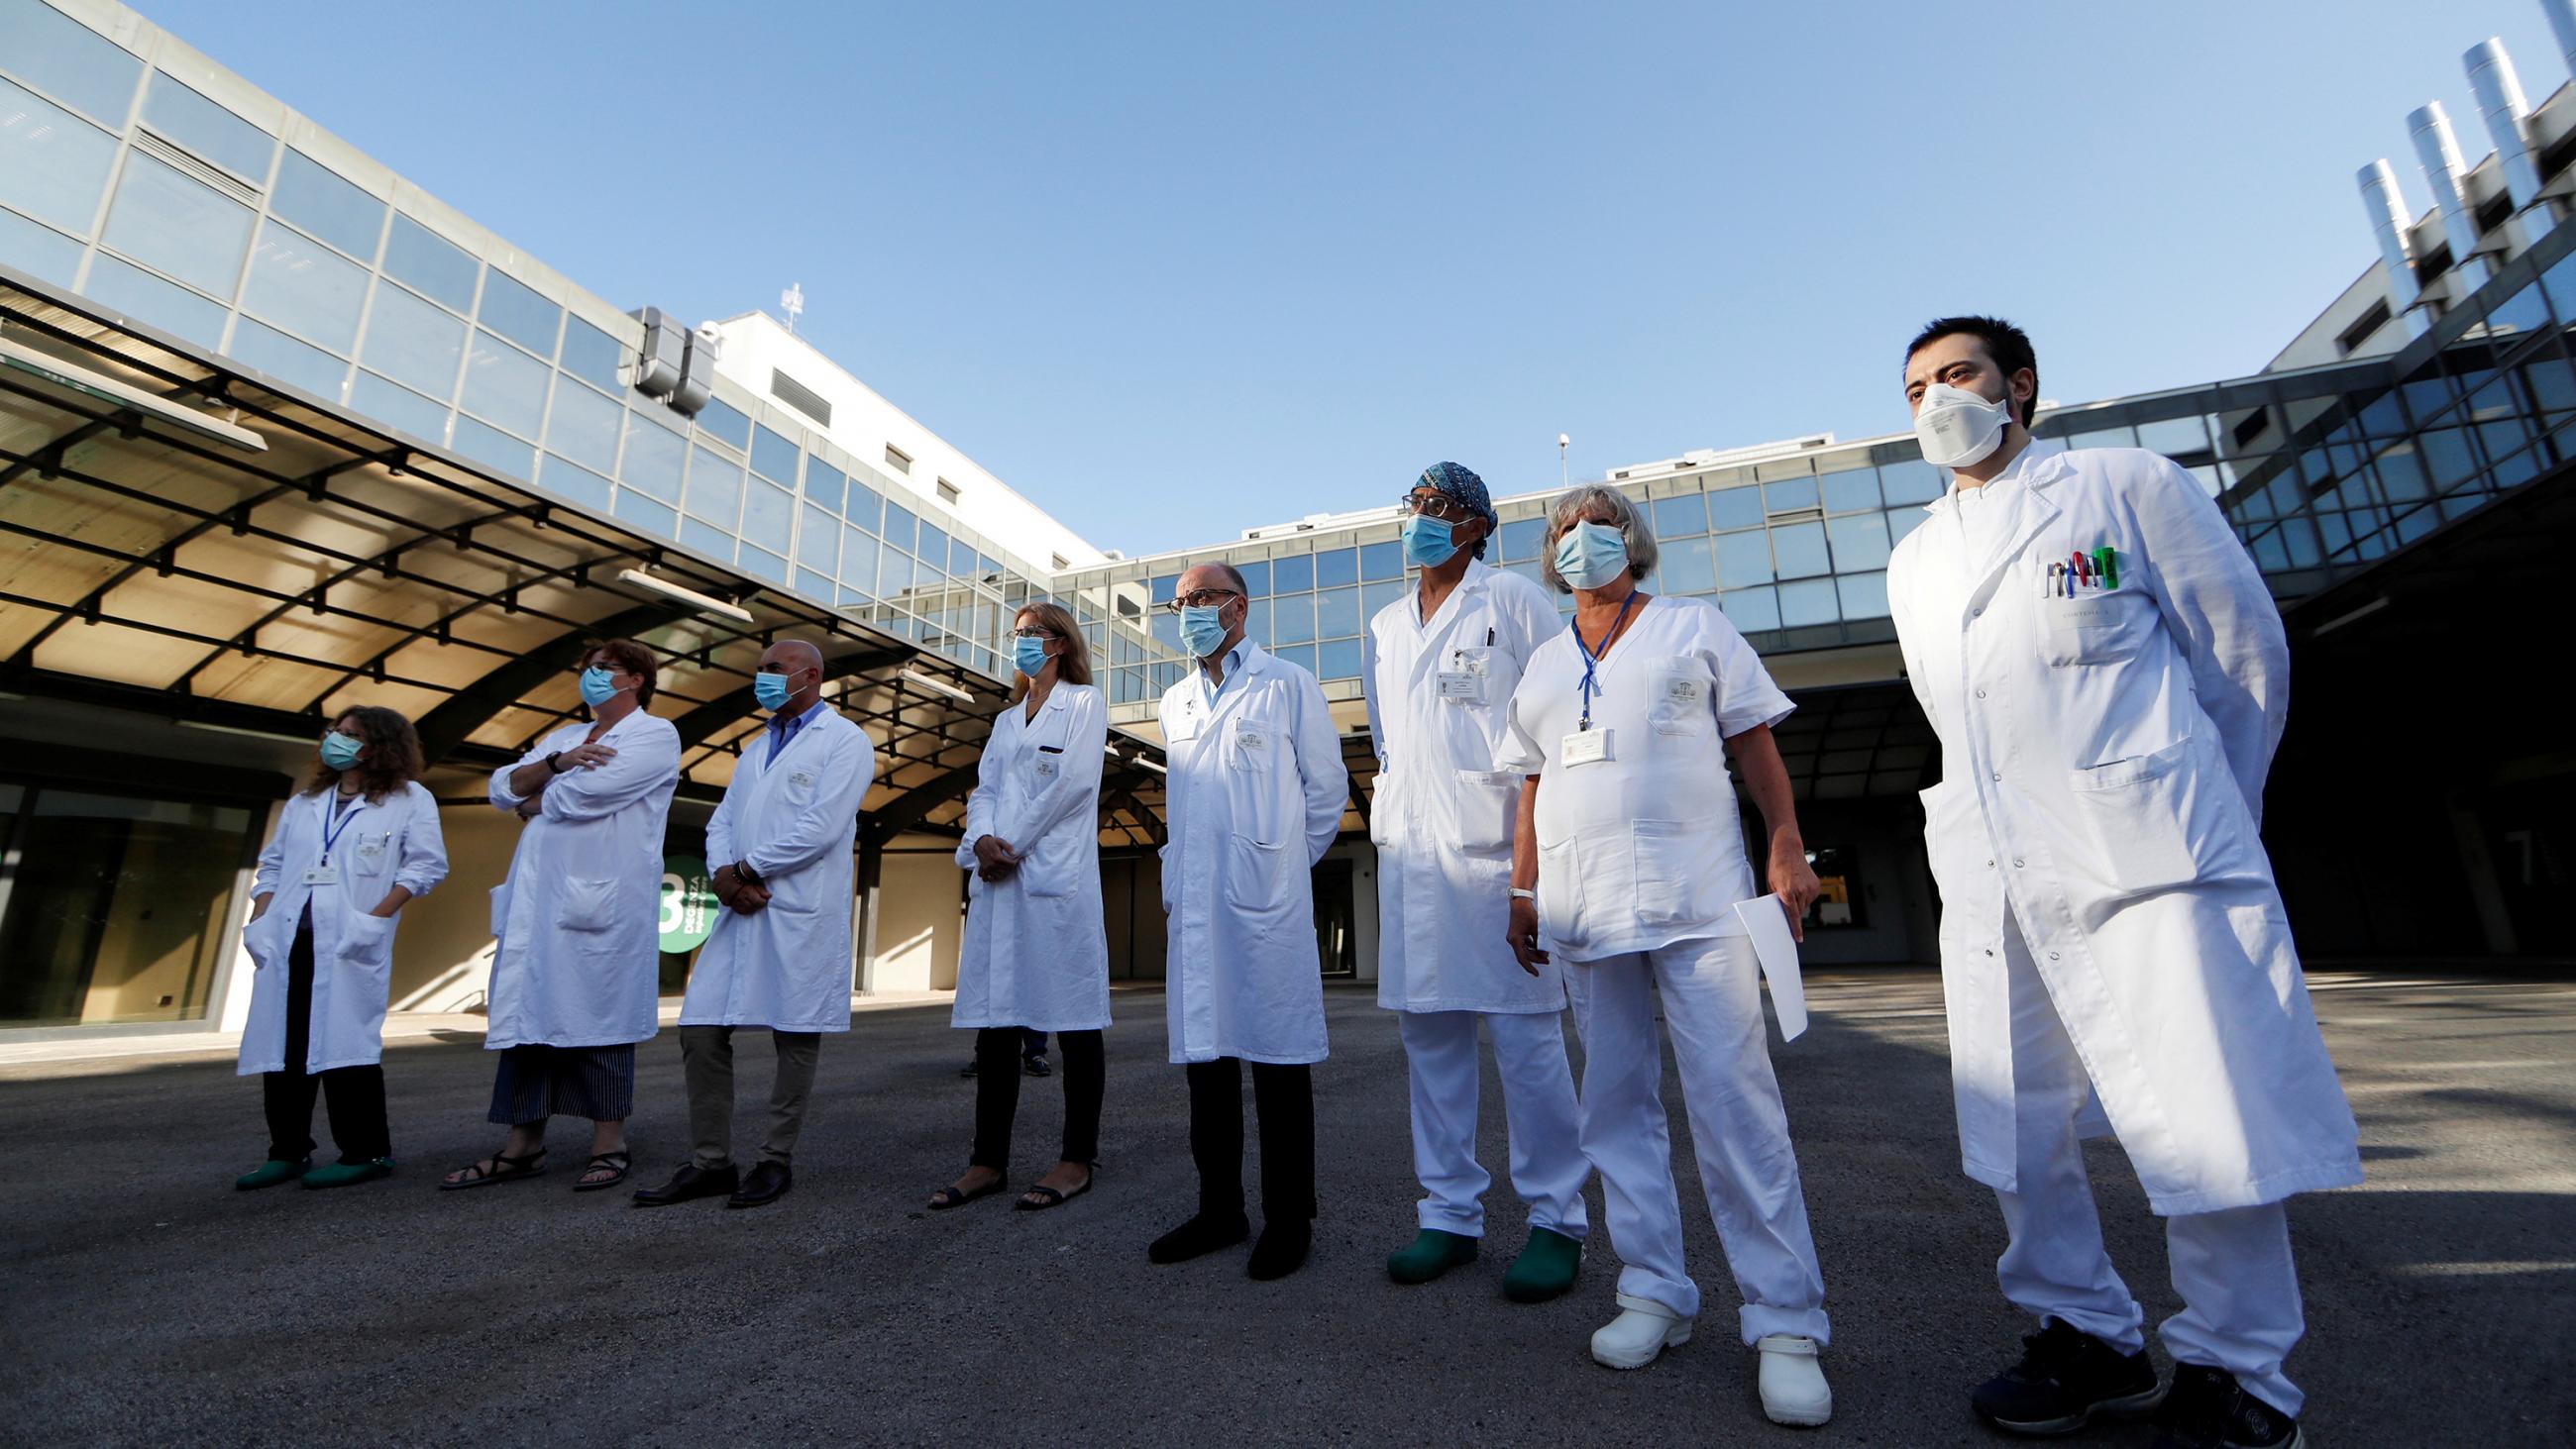 The photo shows a line of medica workers with masks and white coats in front of a modern hospital on a clear day. 